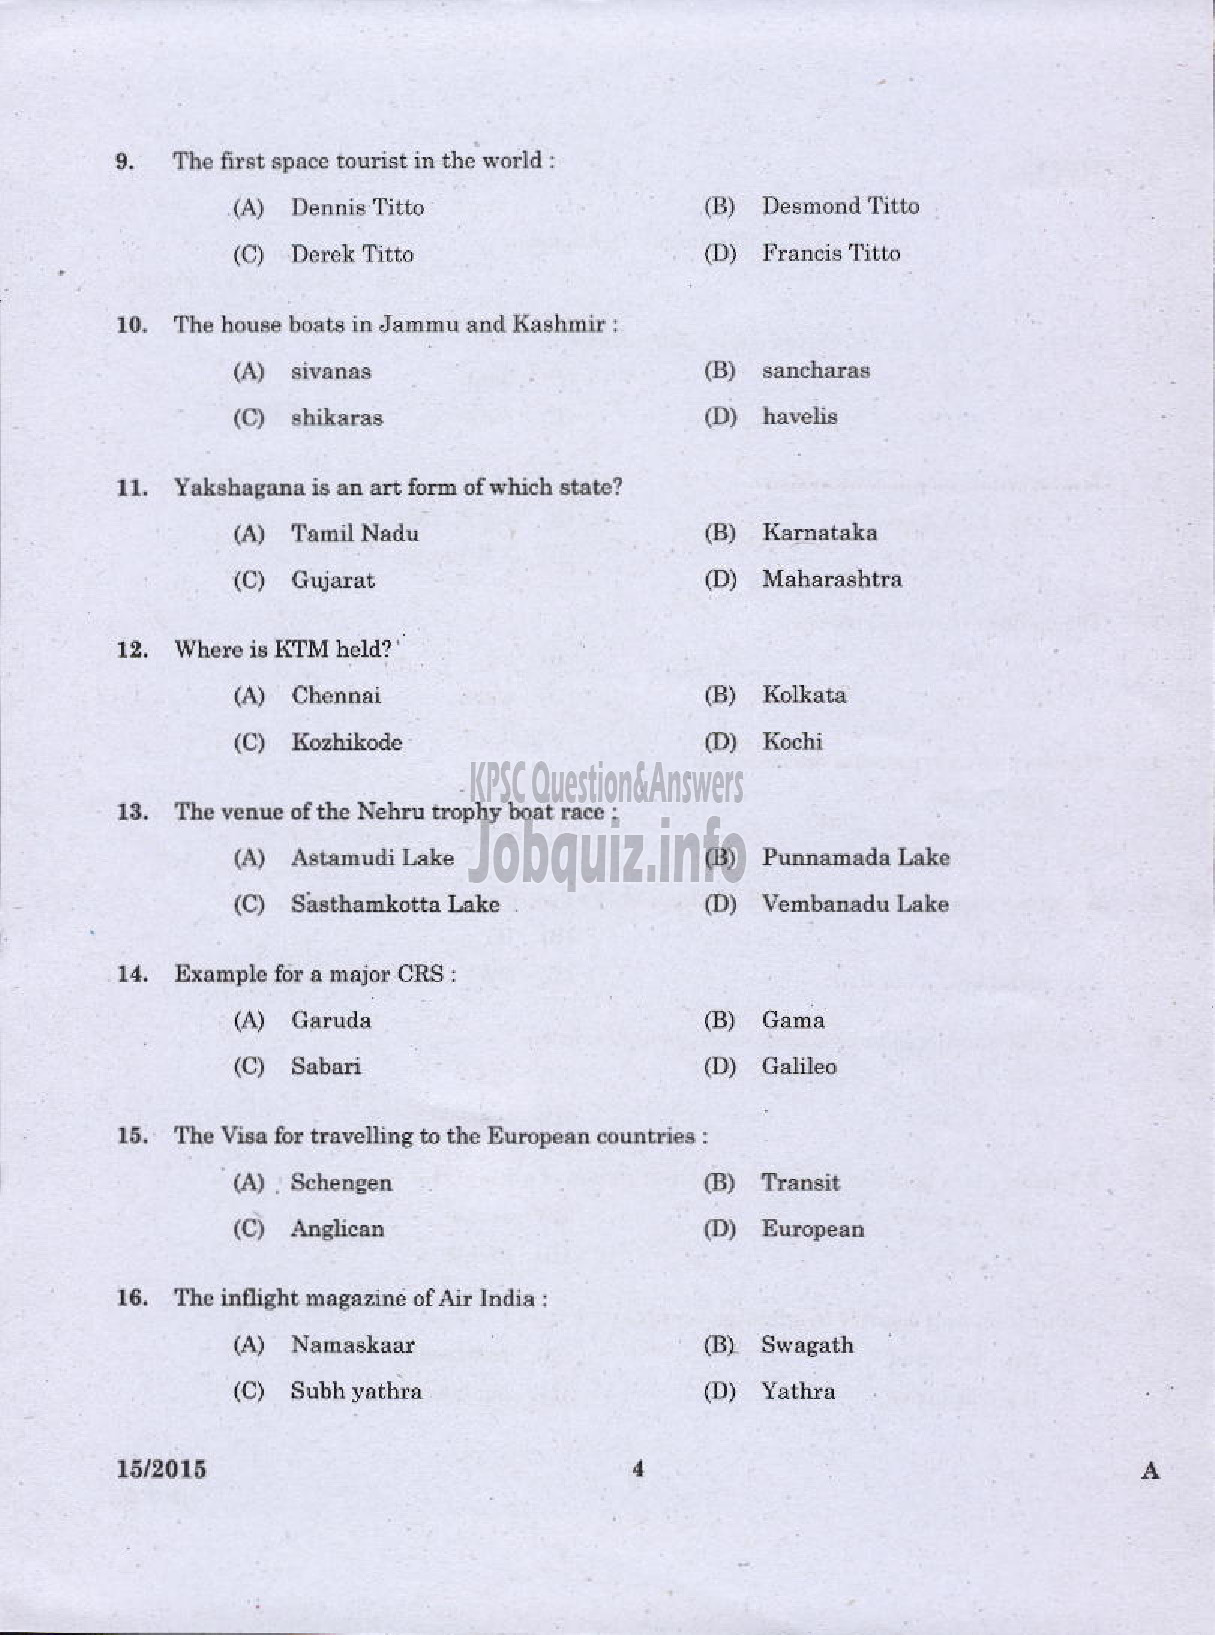 Kerala PSC Question Paper - LABORATORY TECHNICAL ASSISTANT TRAVEL AND TOURISM VHSE-2